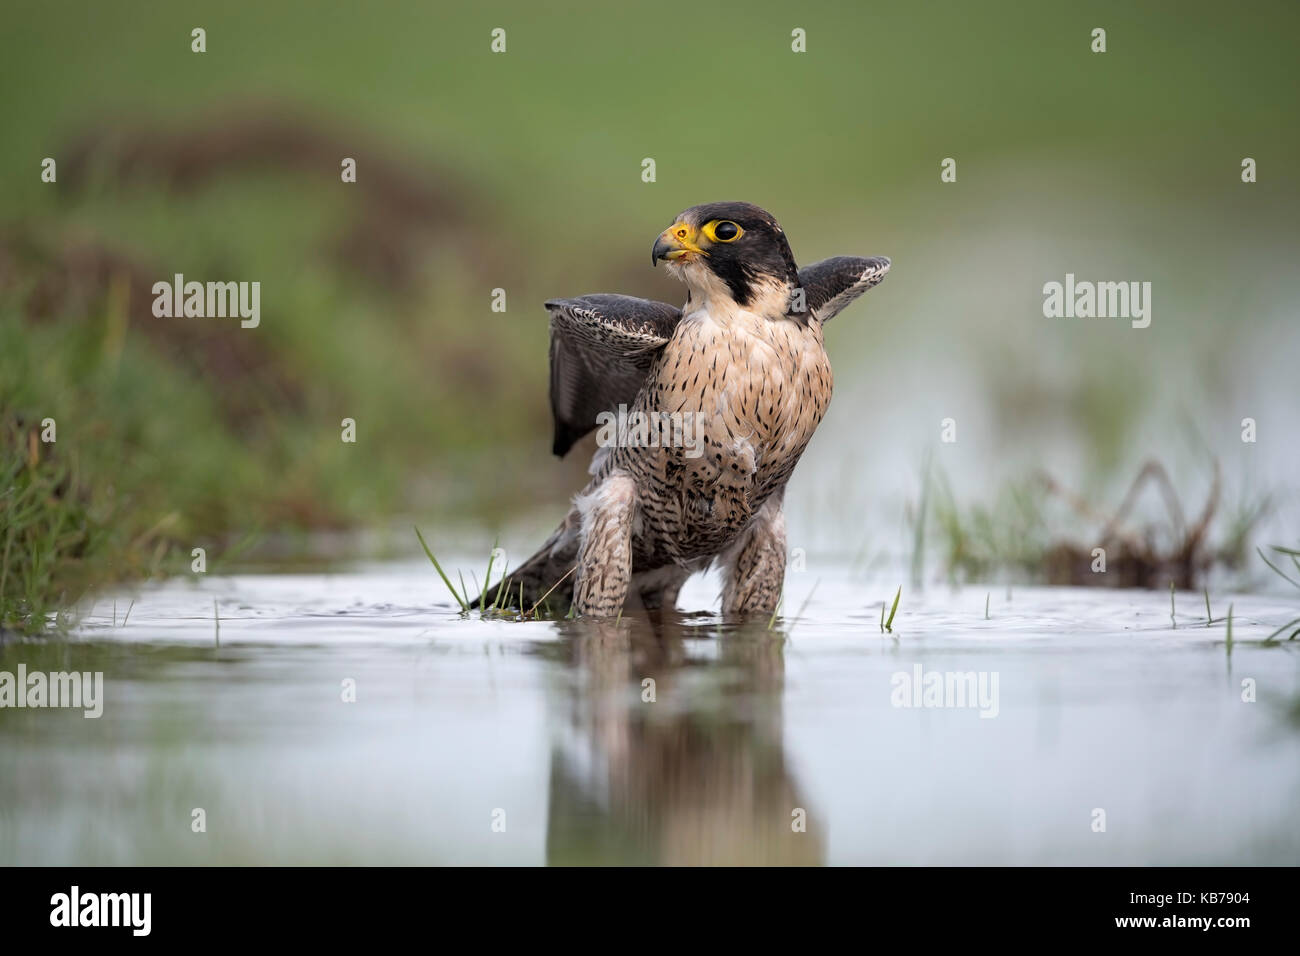 Peregrine Falcon (Falco peregrinus) takes a bath in a ditch, while looking at camera, The Netherlands, Overijssel, Kampen, Kampereiland Stock Photo